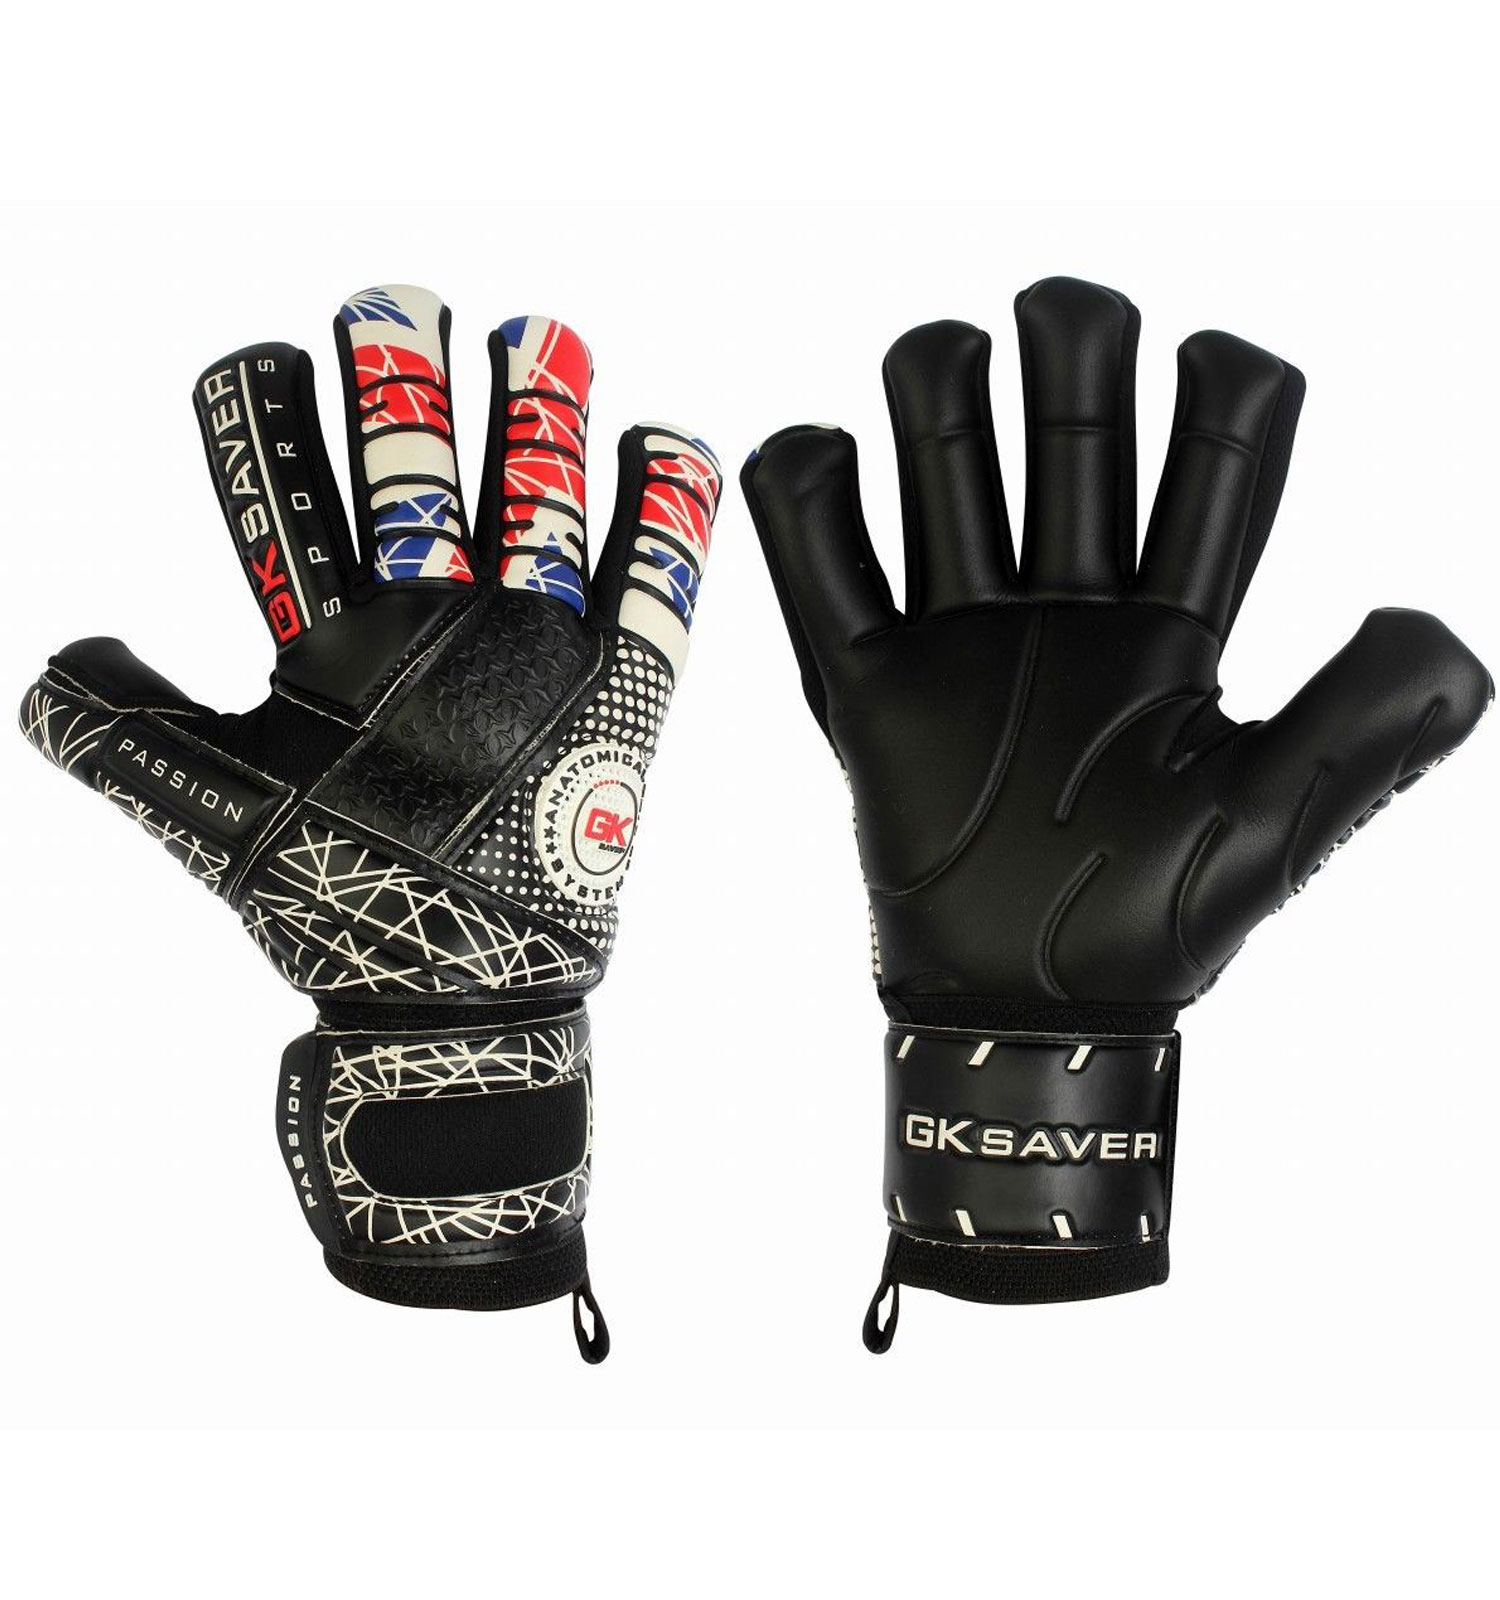 keepers saver Negative Cut Football  passion black Goalie Gloves 6-11 